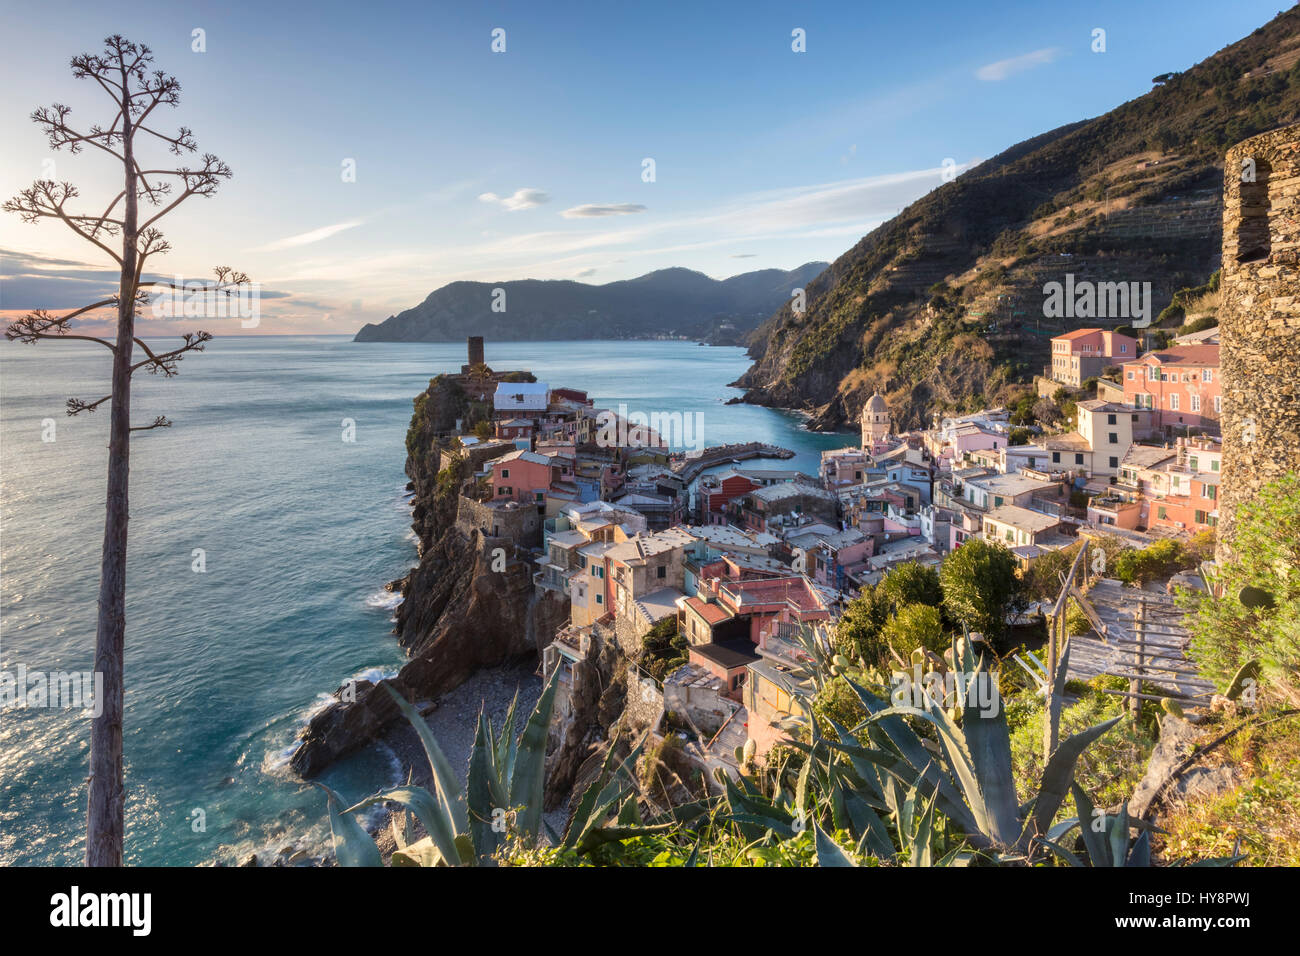 Sunset in the harbour of the village of Vernazza, Cinque Terre national park, province of La Spezia, Liguria, Italy. Stock Photo